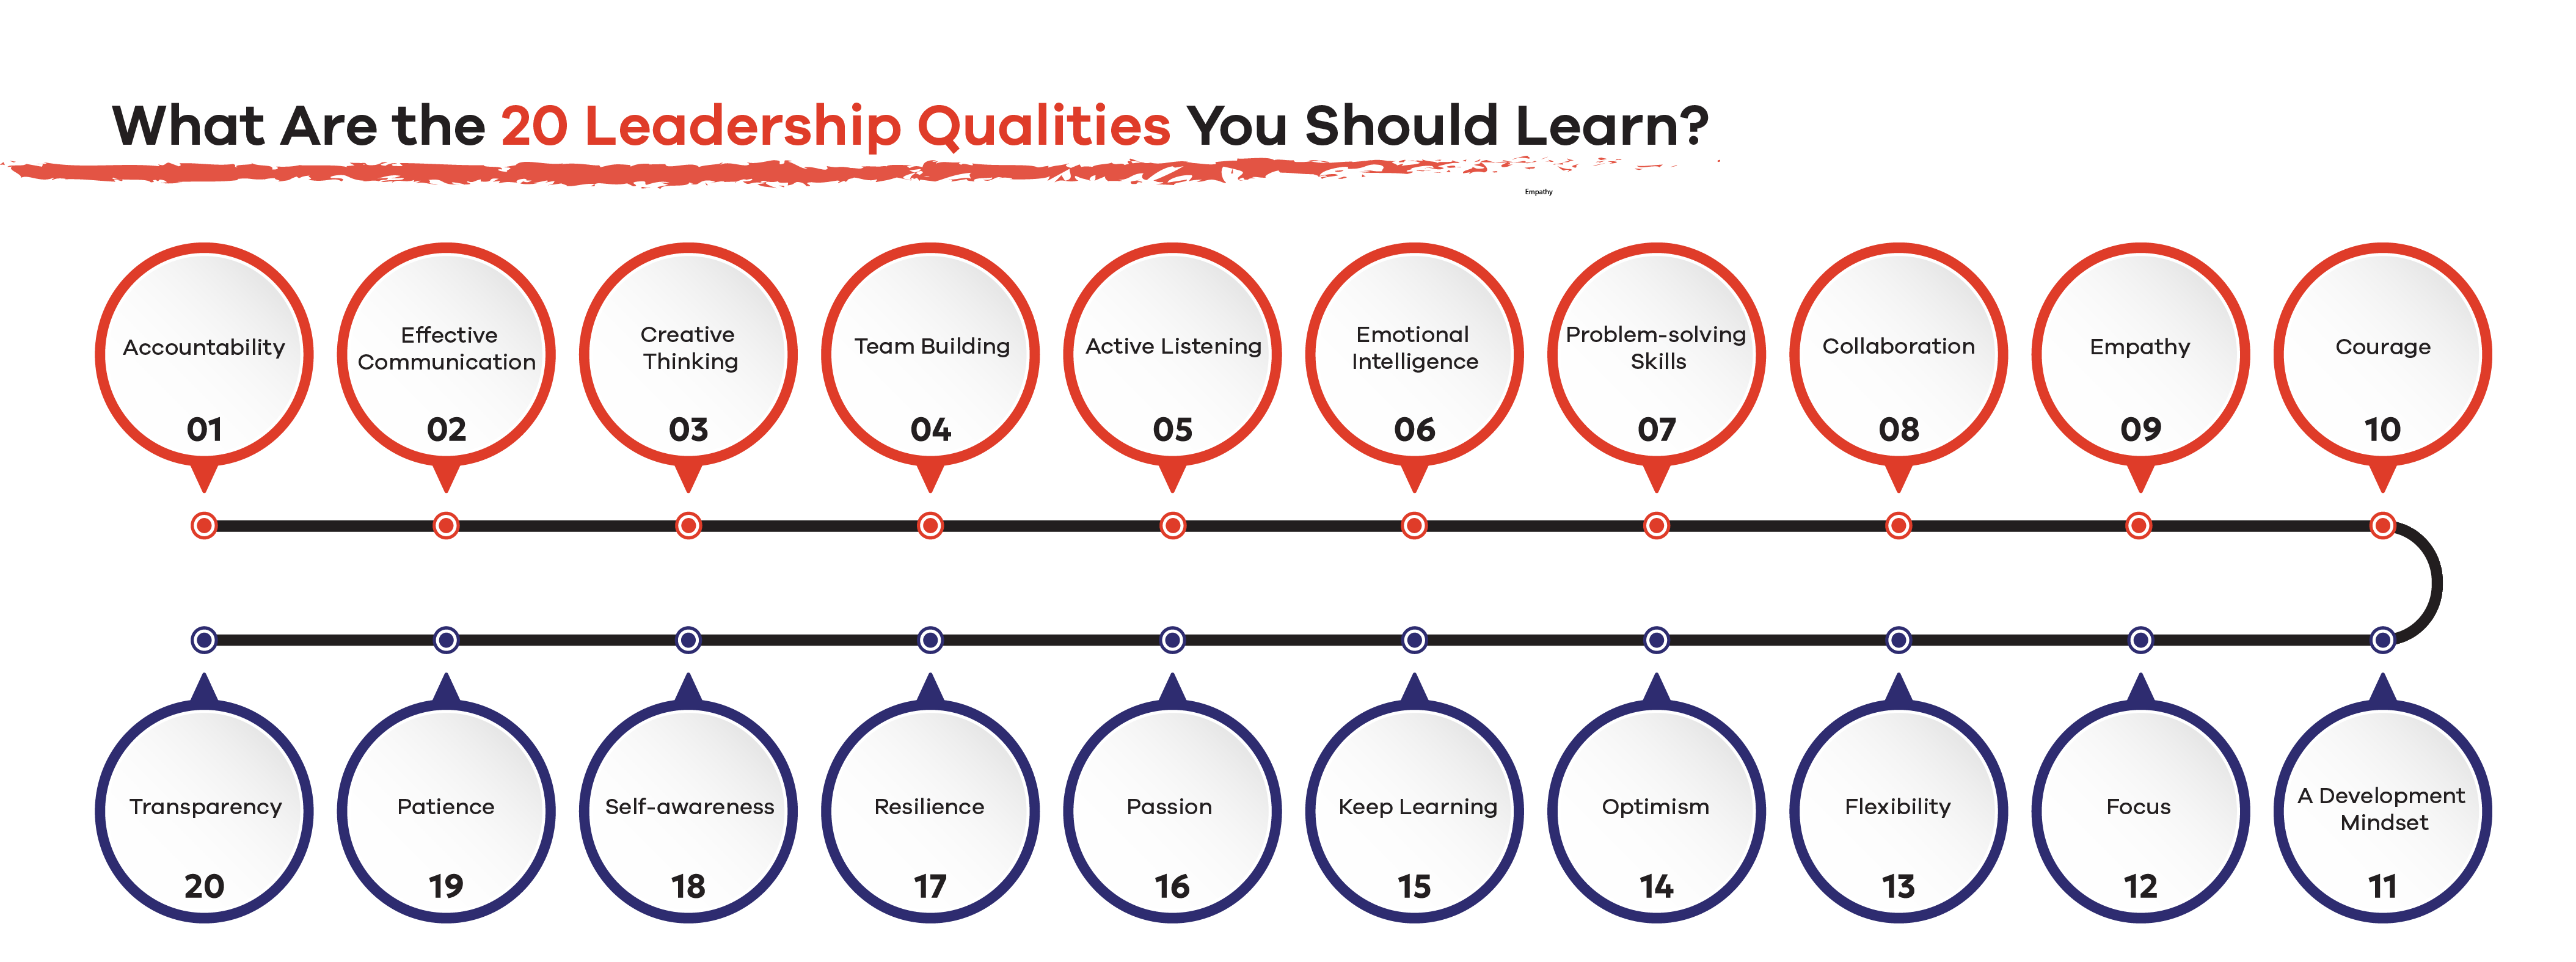 What Are the 20 Qualities of a Good Leader You Should Learn? 